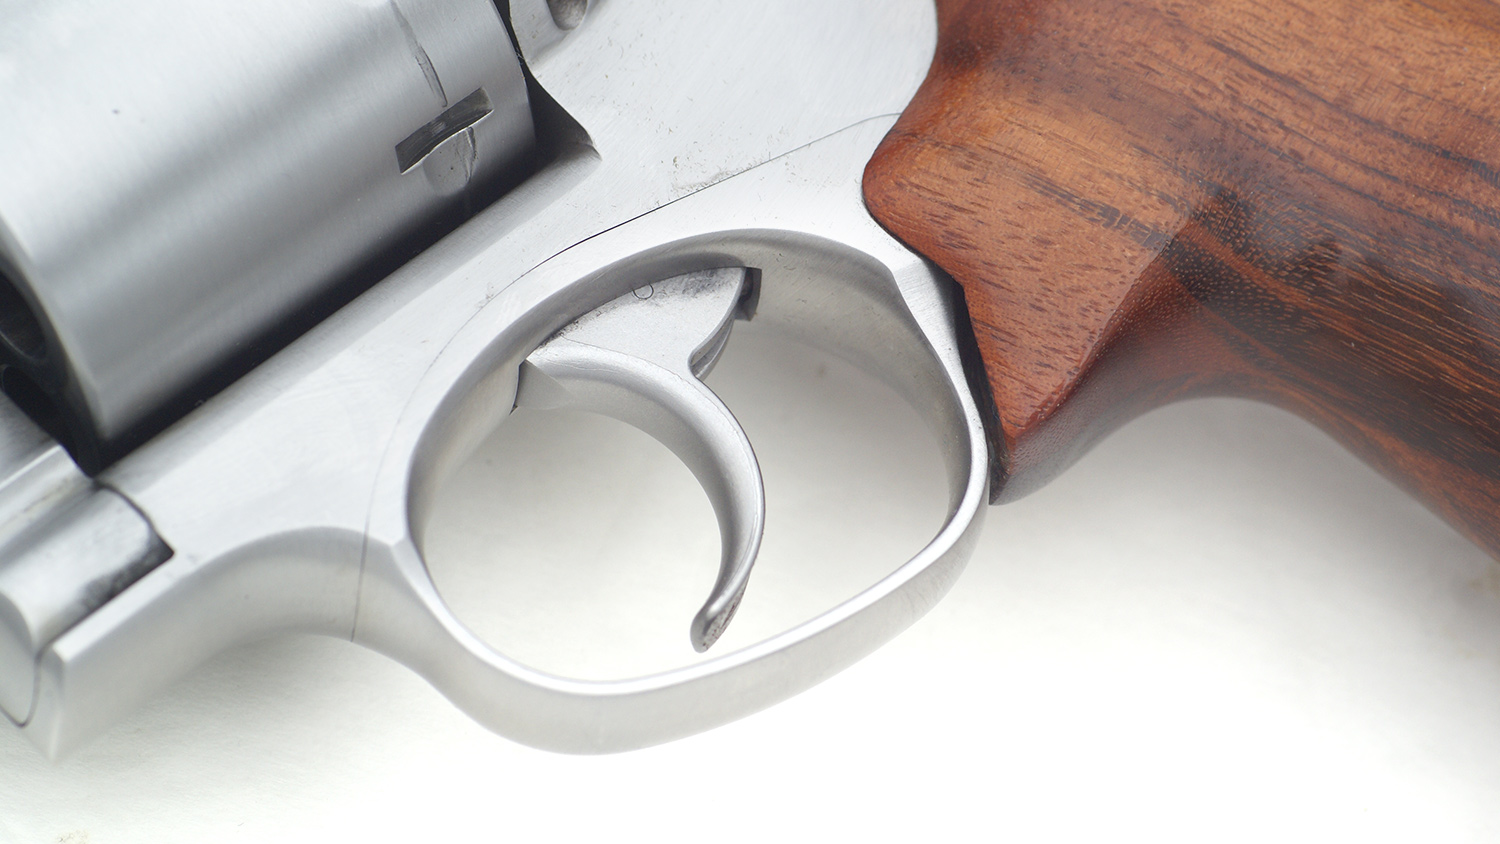 You want a properly-shaped revolver trigger